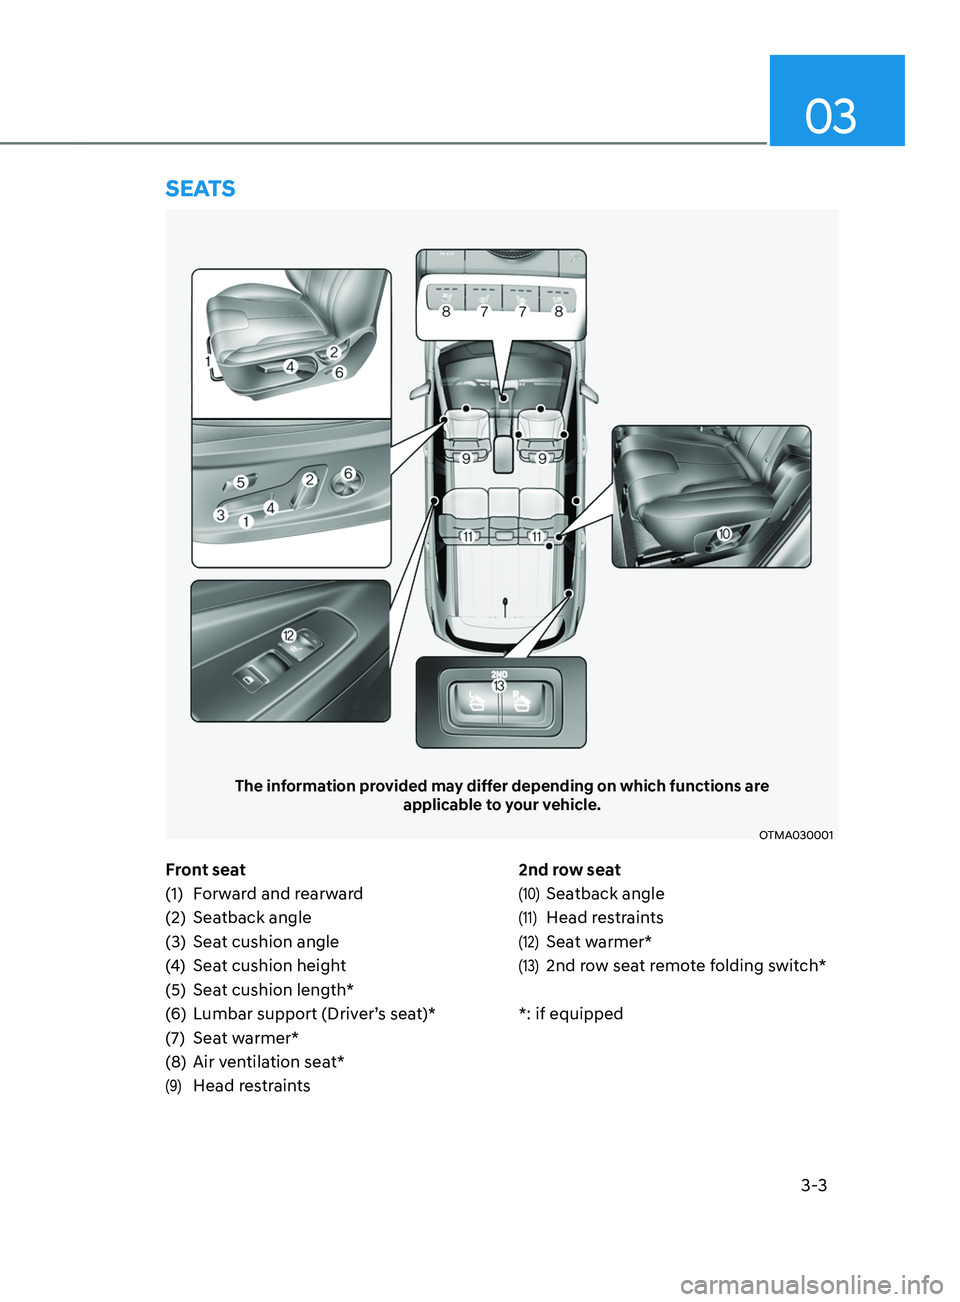 HYUNDAI SANTA FE 2021  Owners Manual 3-3
03
Front seat
(1)
 Forw
ard and rearward
(2)
 Seatback angle
(3

)
 Seat cushion angle
(4

)
 Seat cushion heigh
 t
(5)
 Seat cushion length*
(

6)
 Lumbar support (Driv
 er’s seat)*
(7)
 Seat w